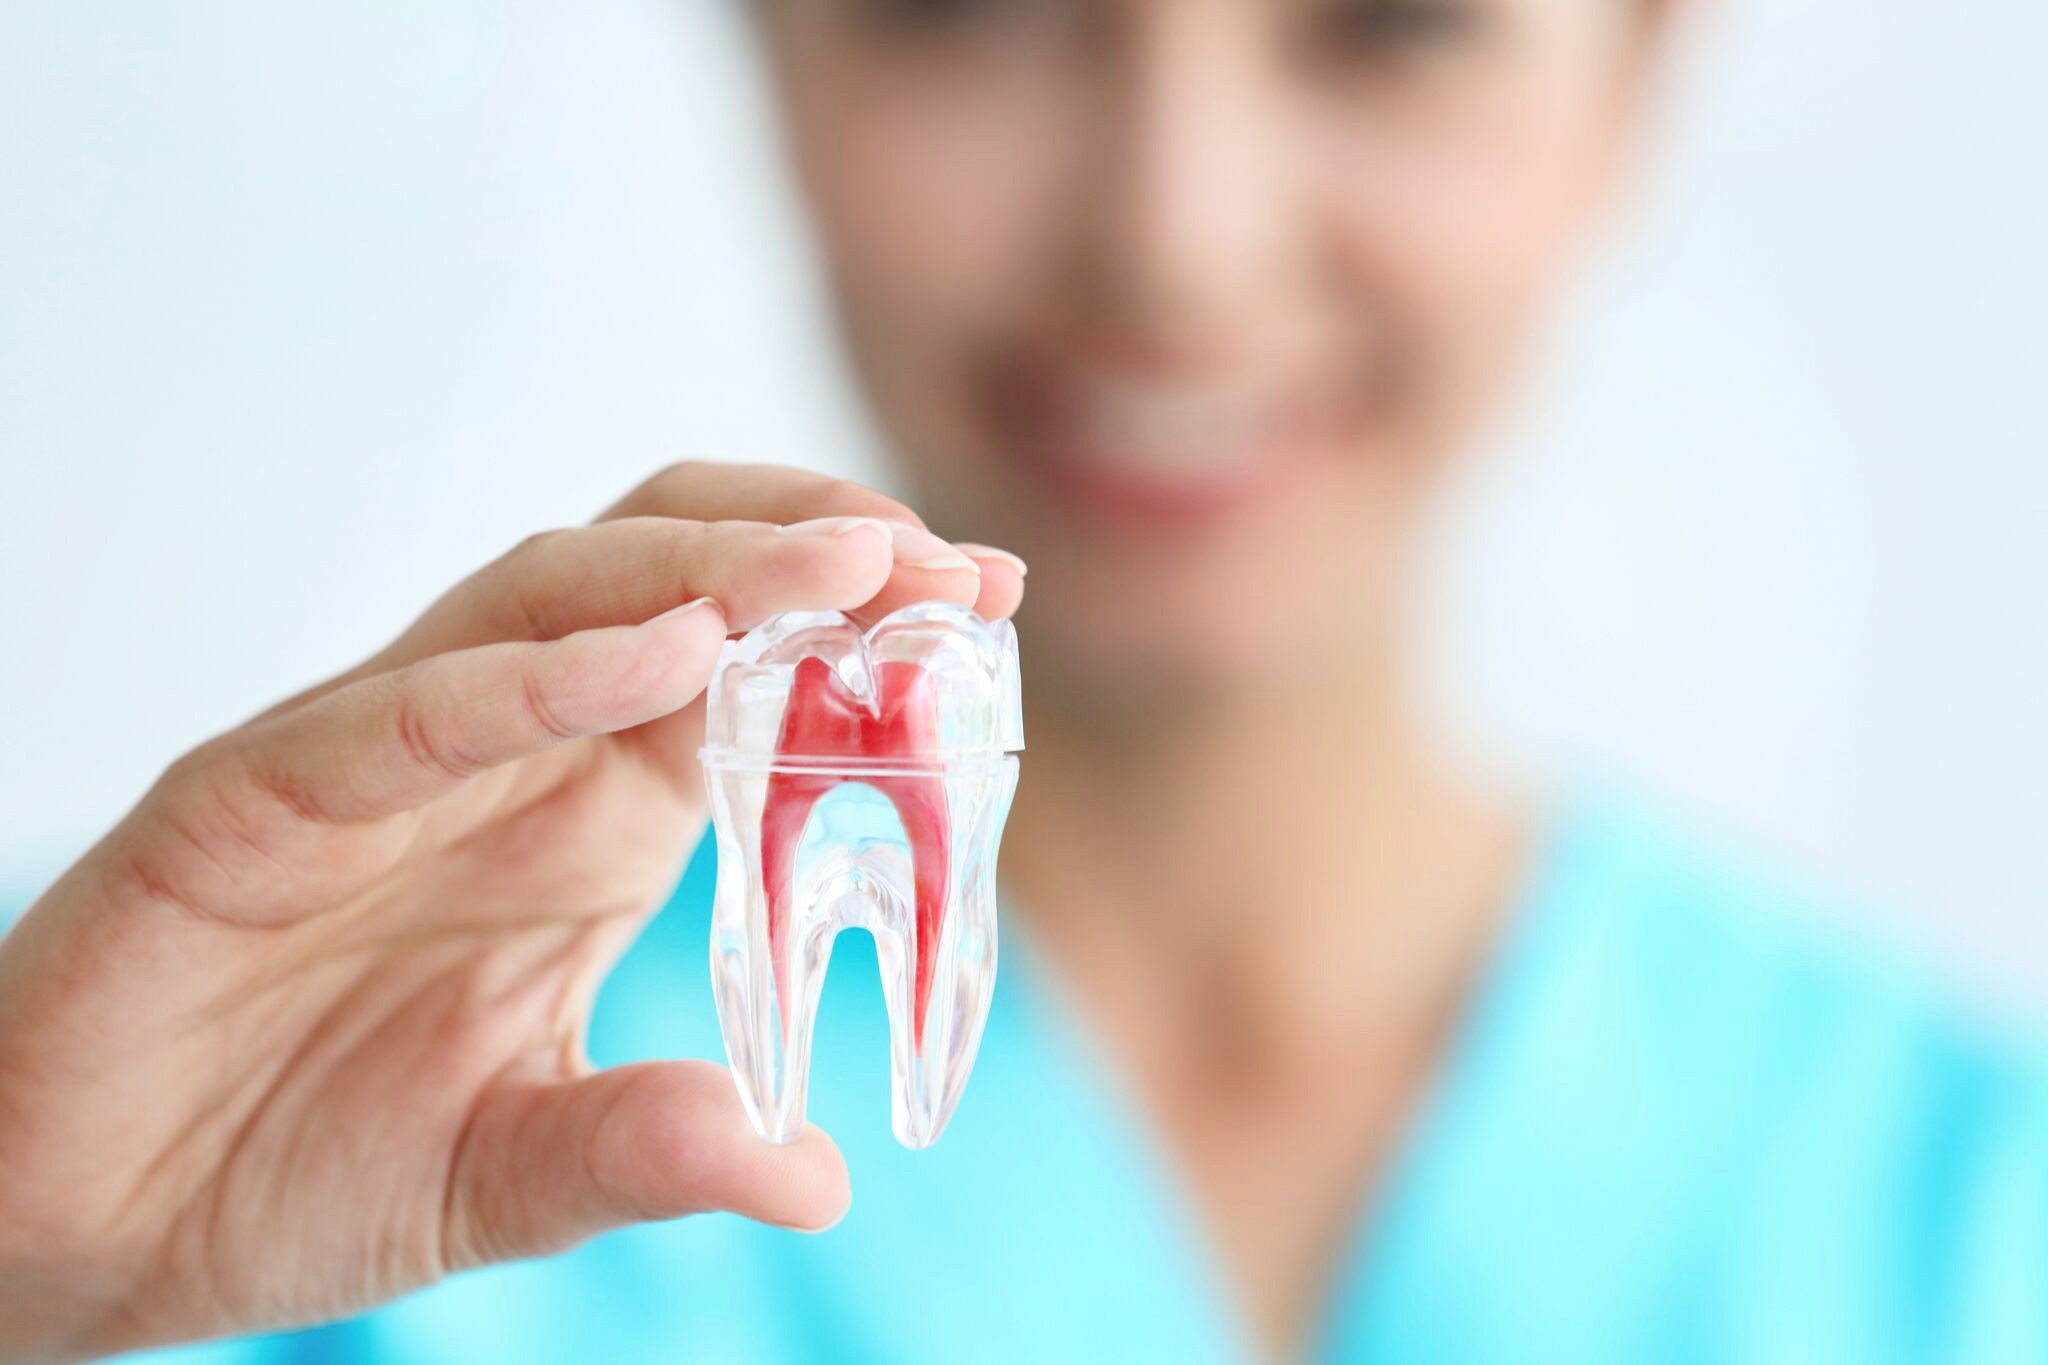 The Services and Functions Work Under Root Canal Work in Auckland CBD